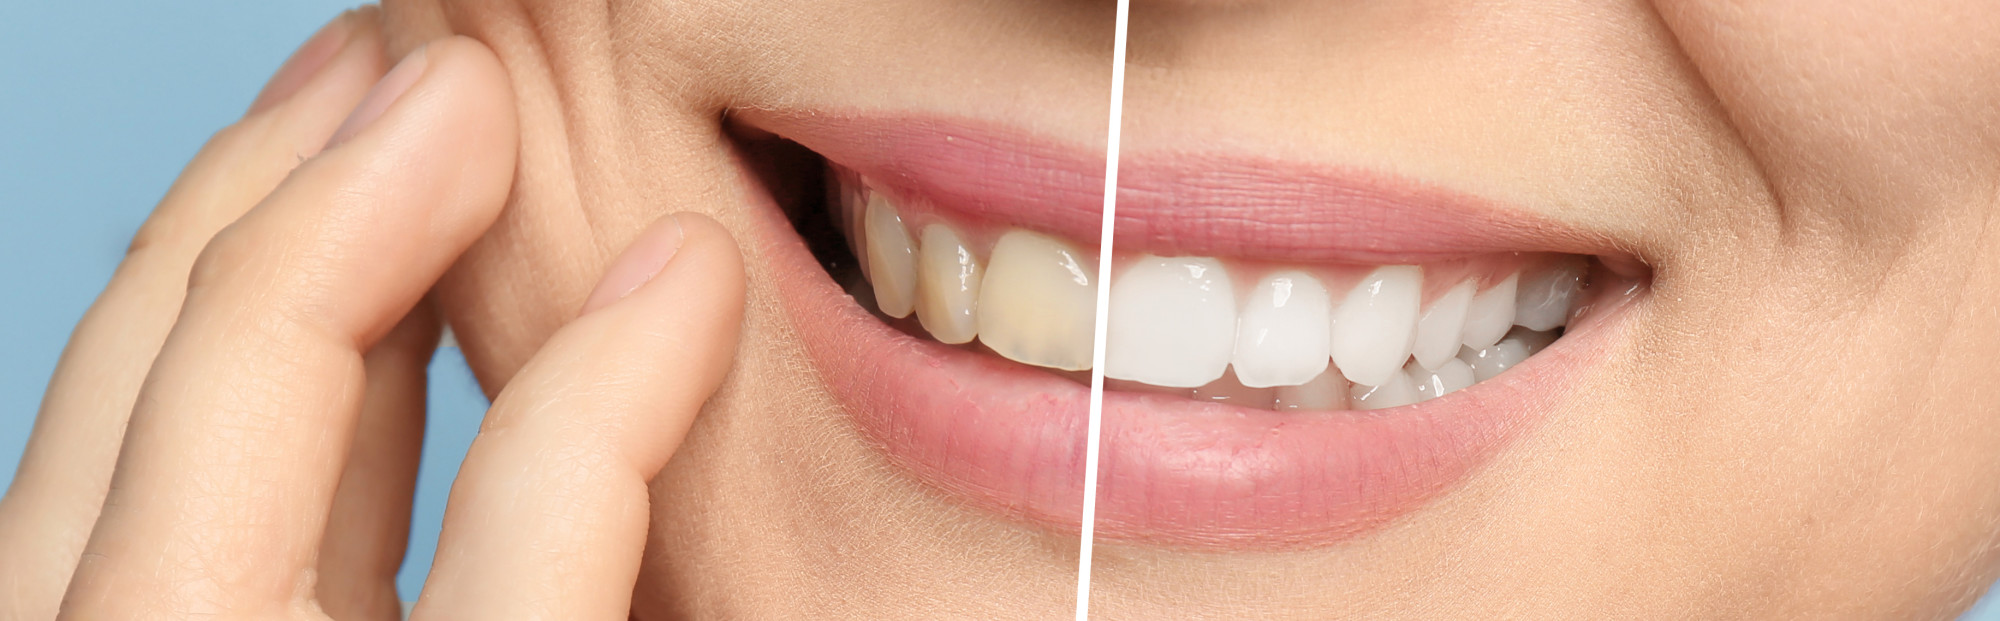 mouth before and after teeth whitening